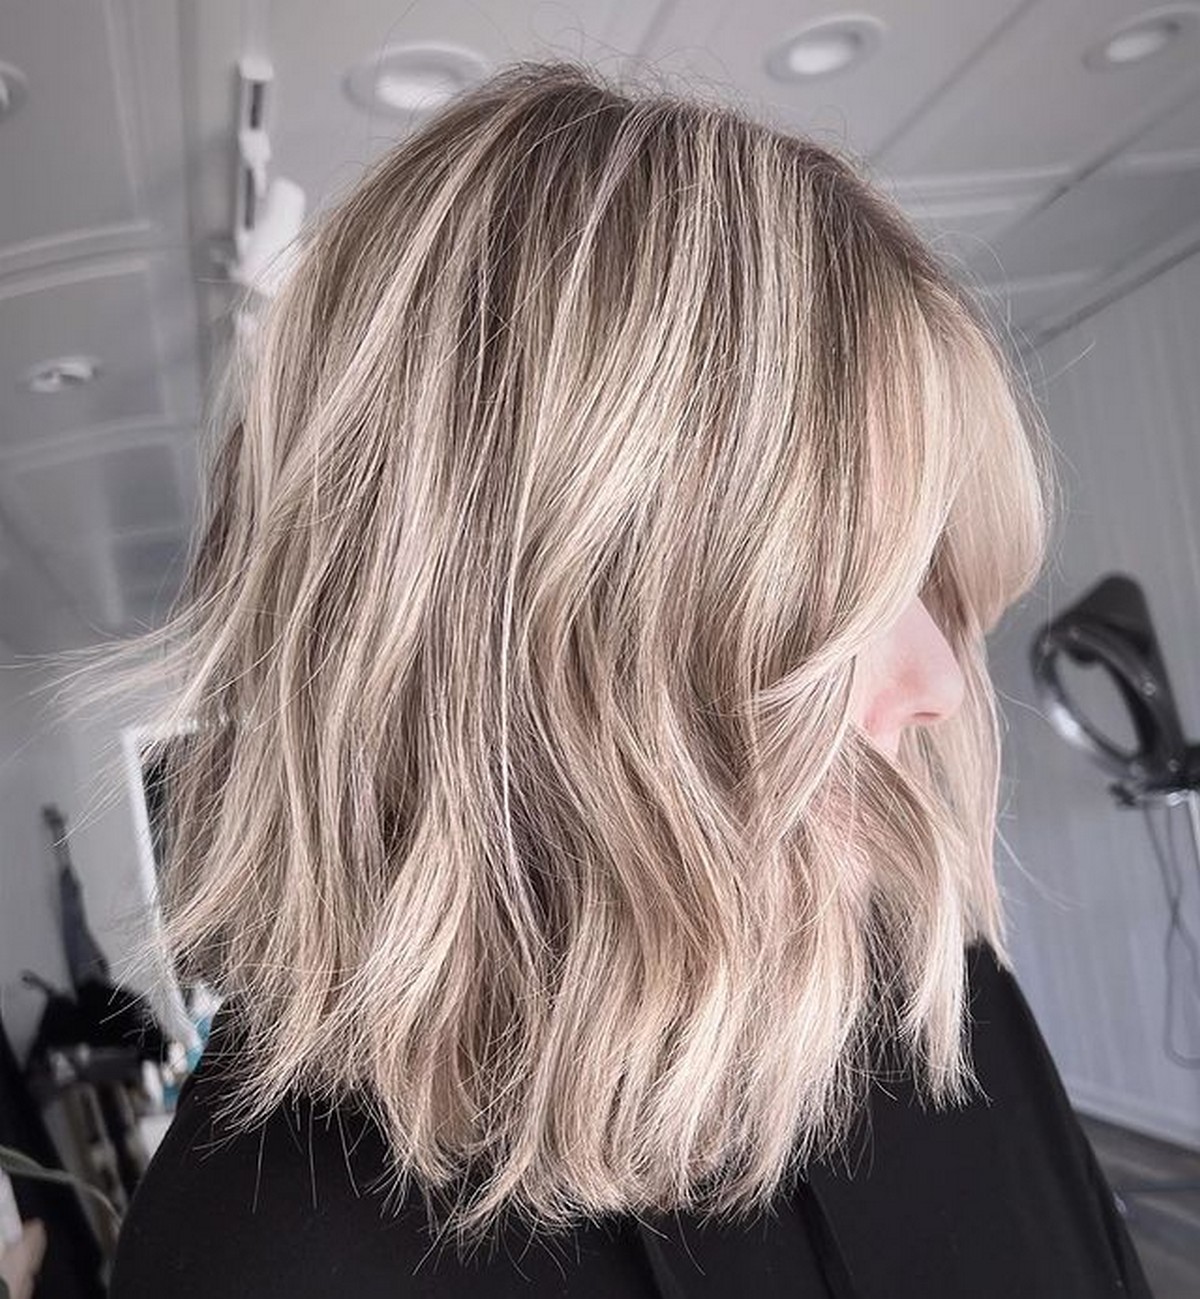 Glowing Dark Dirty Blonde Hair With Highlights